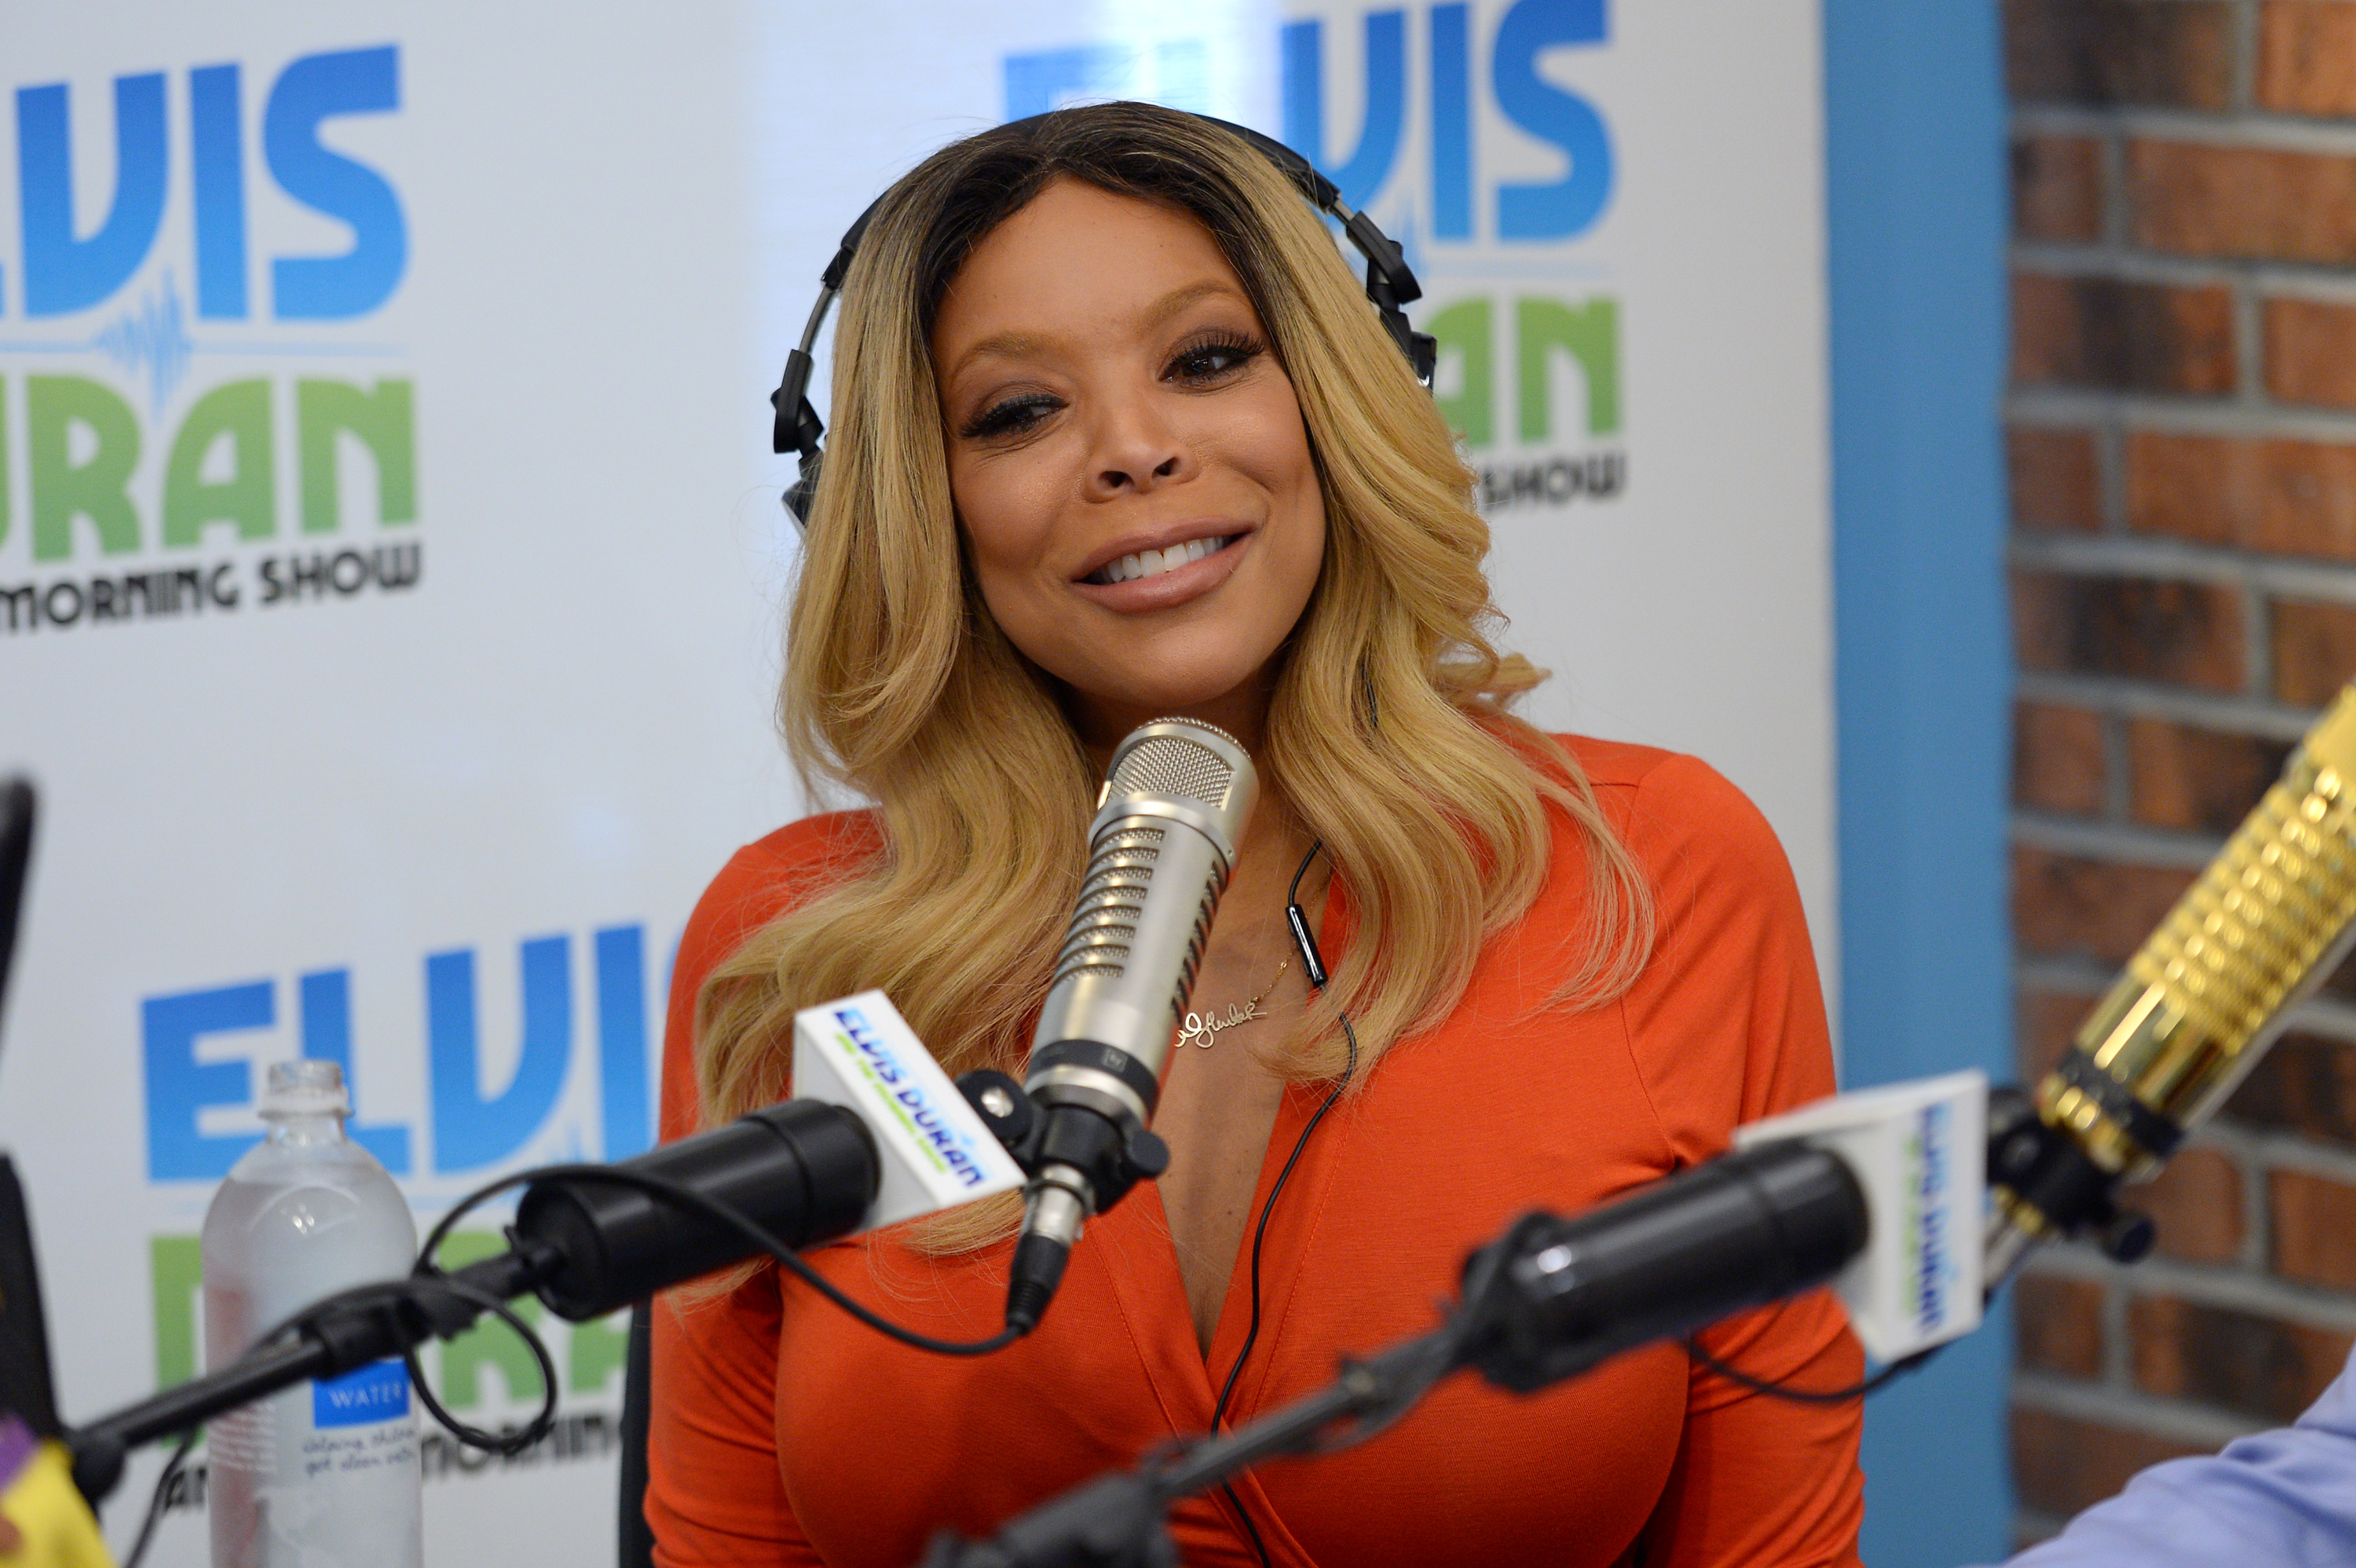 Wendy Williams visits The Elvis Duran Z100 Morning Show at Z100 Studio in New York City, on September 8, 2015. | Source: Getty Images